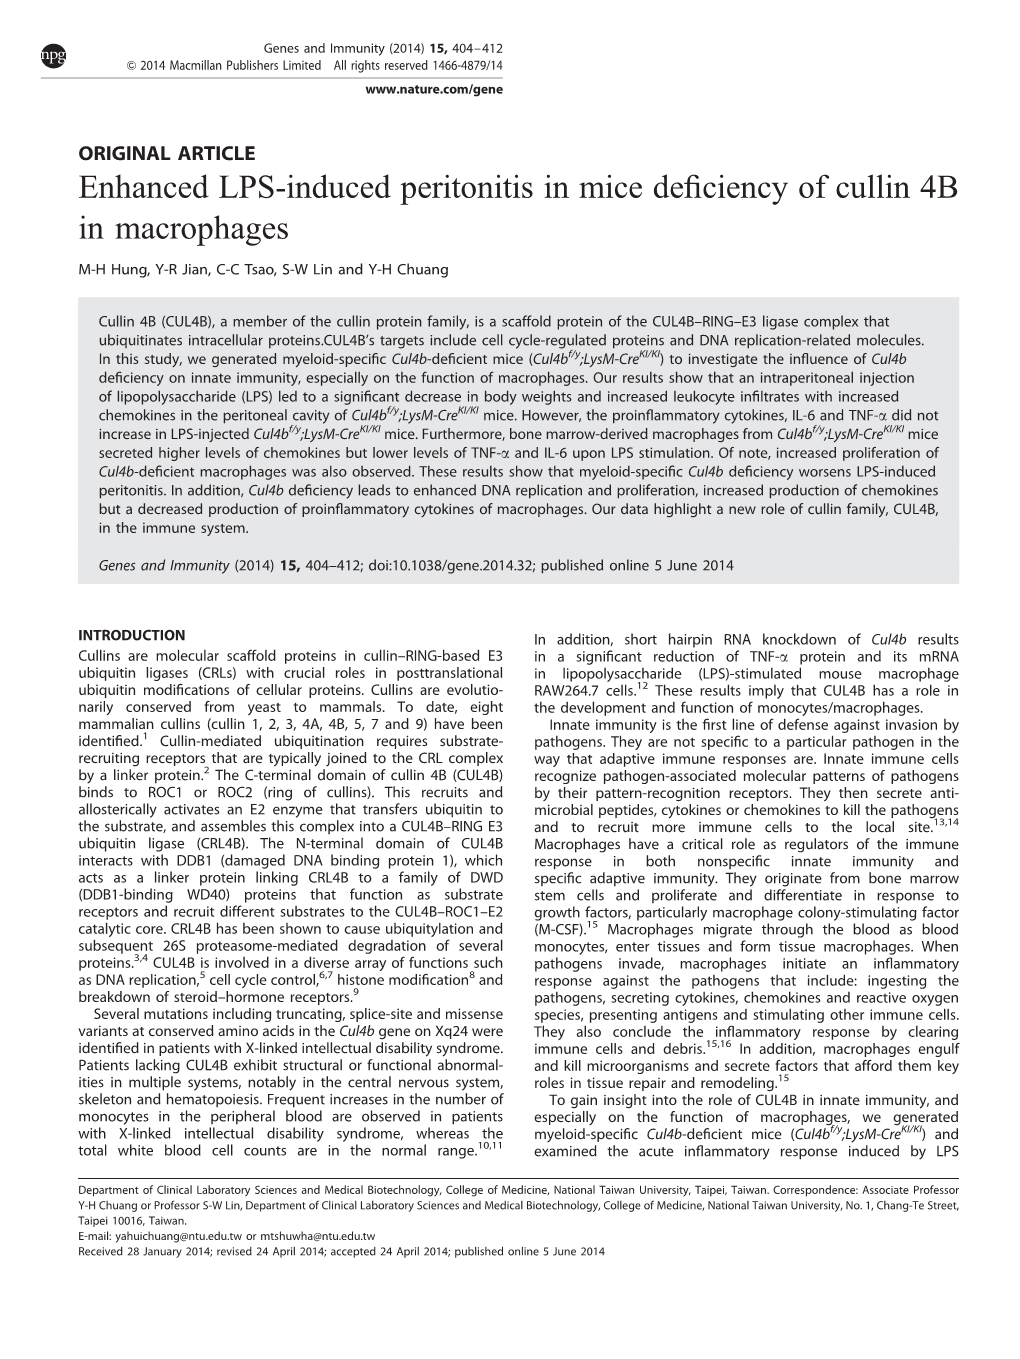 Enhanced LPS-Induced Peritonitis in Mice Deficiency of Cullin 4B